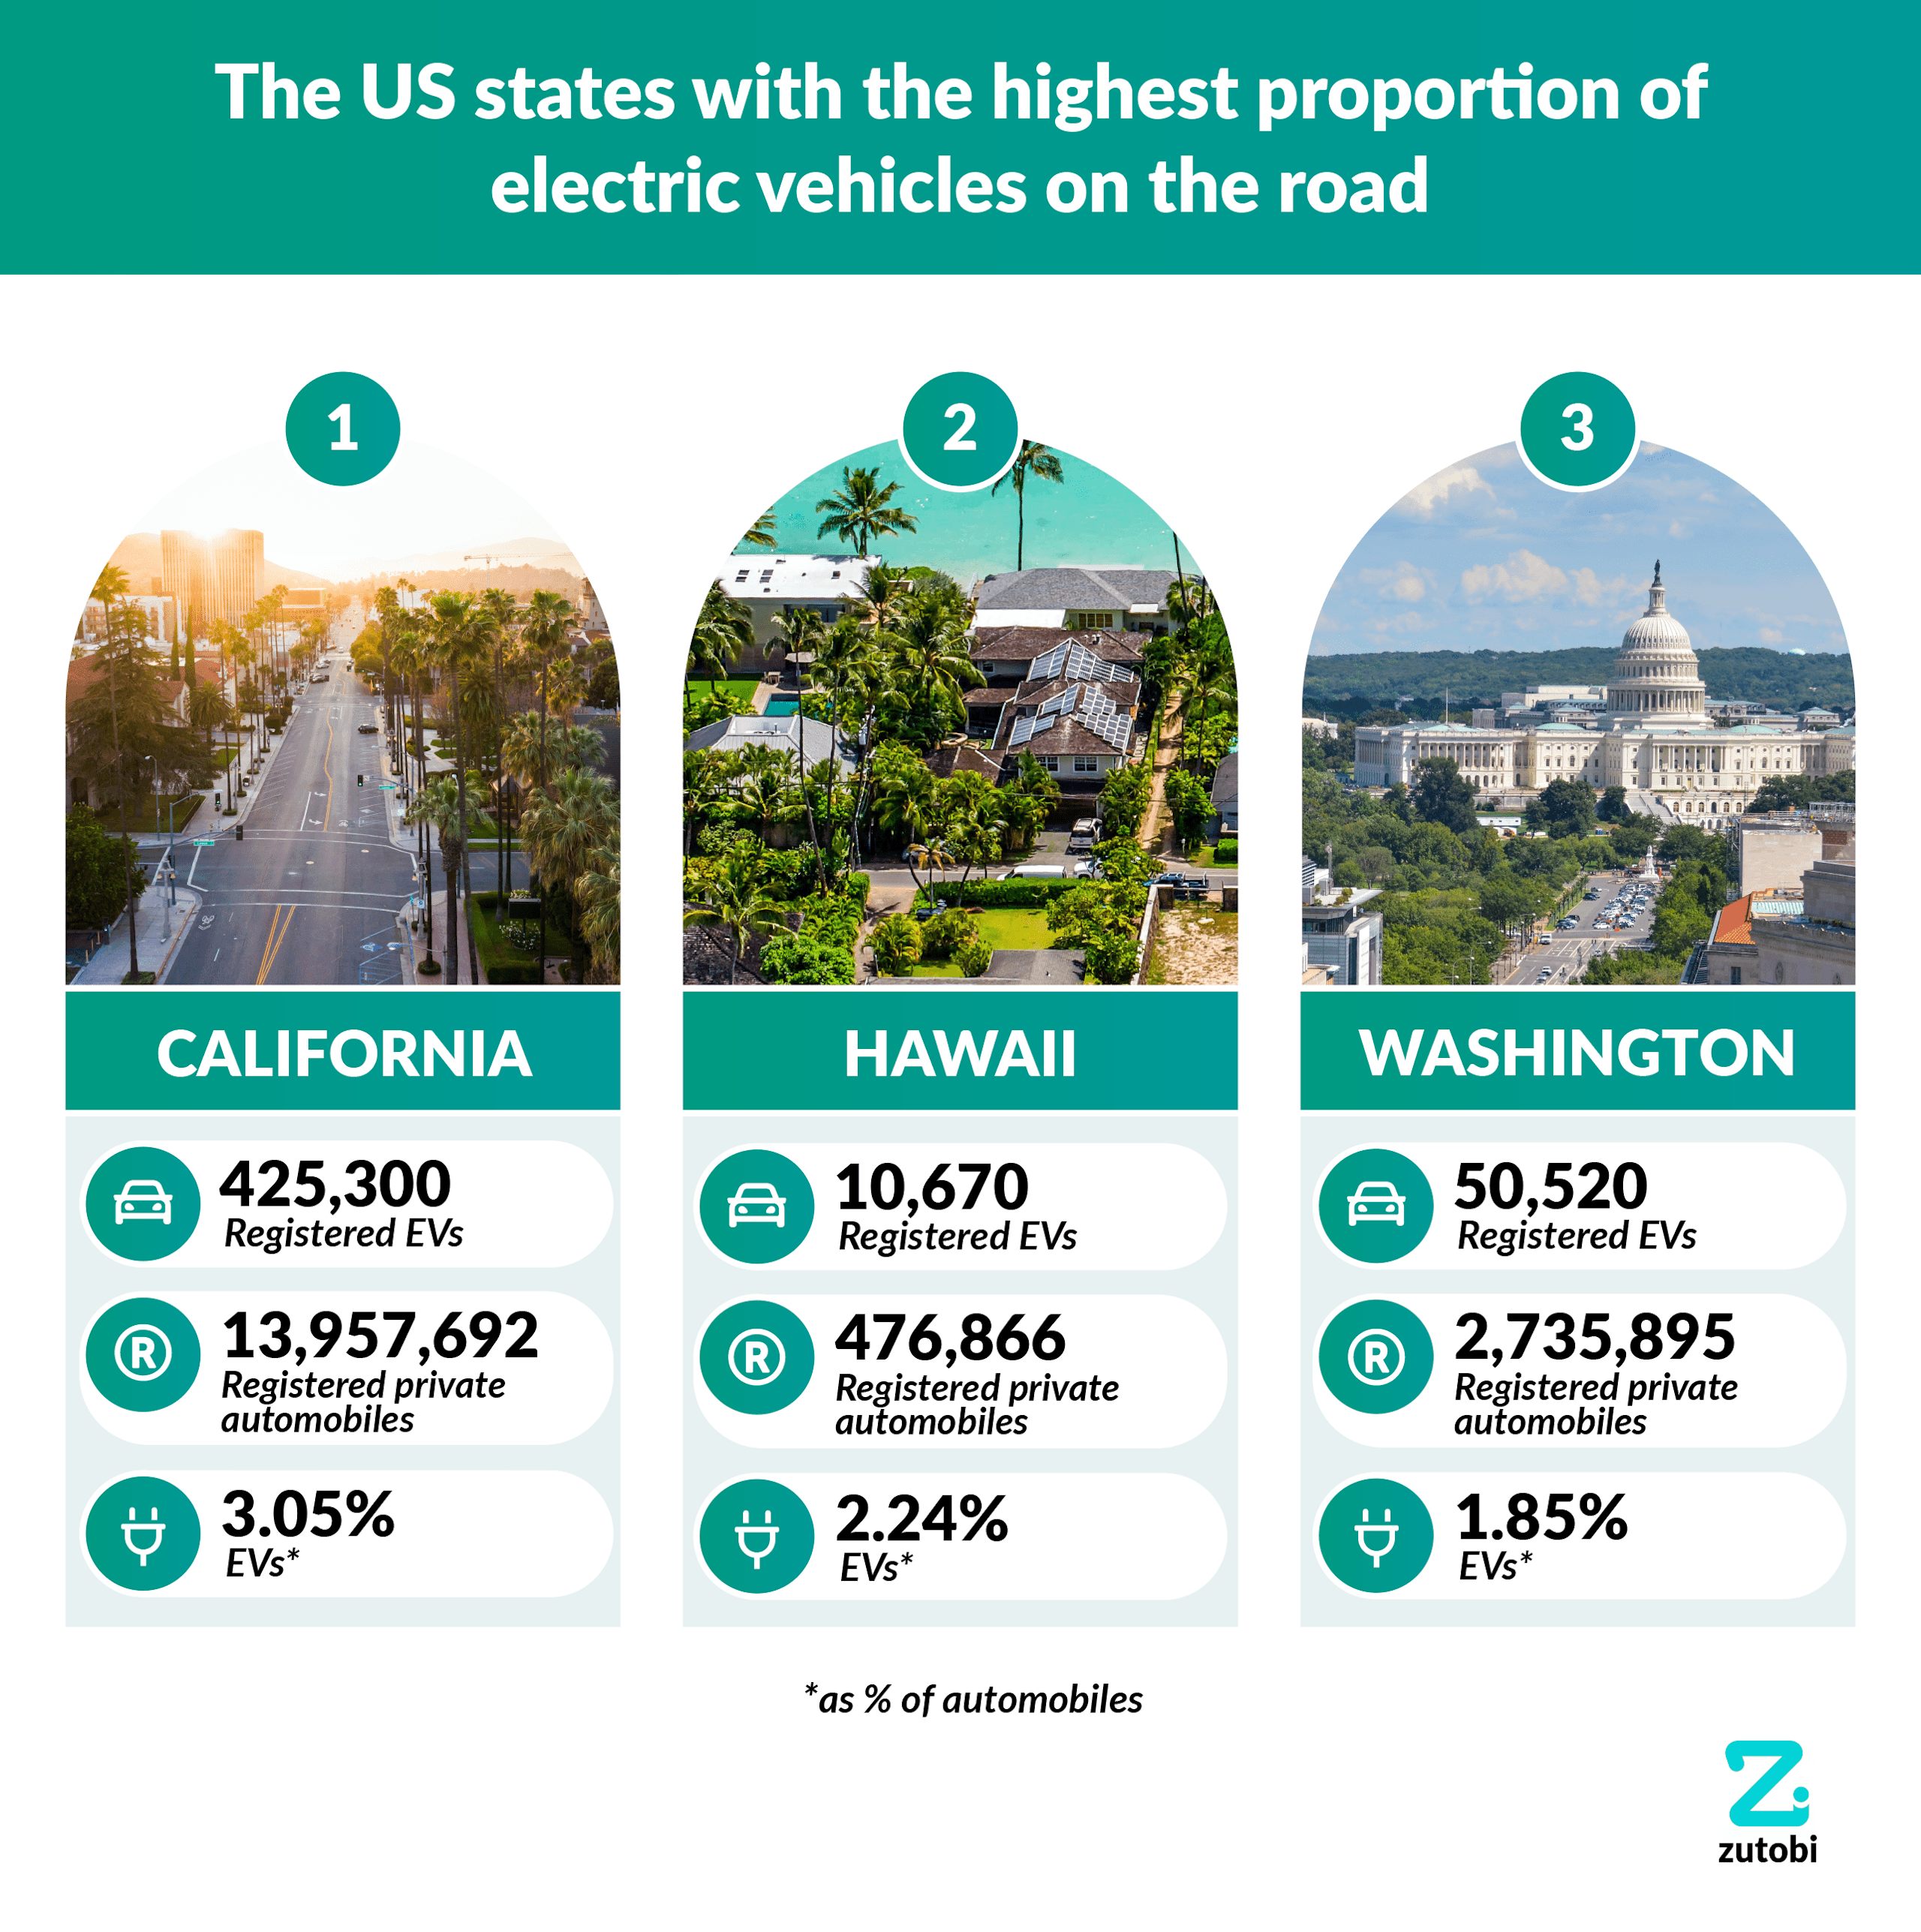 The US states with the highest proportion of electric vehicles on the road